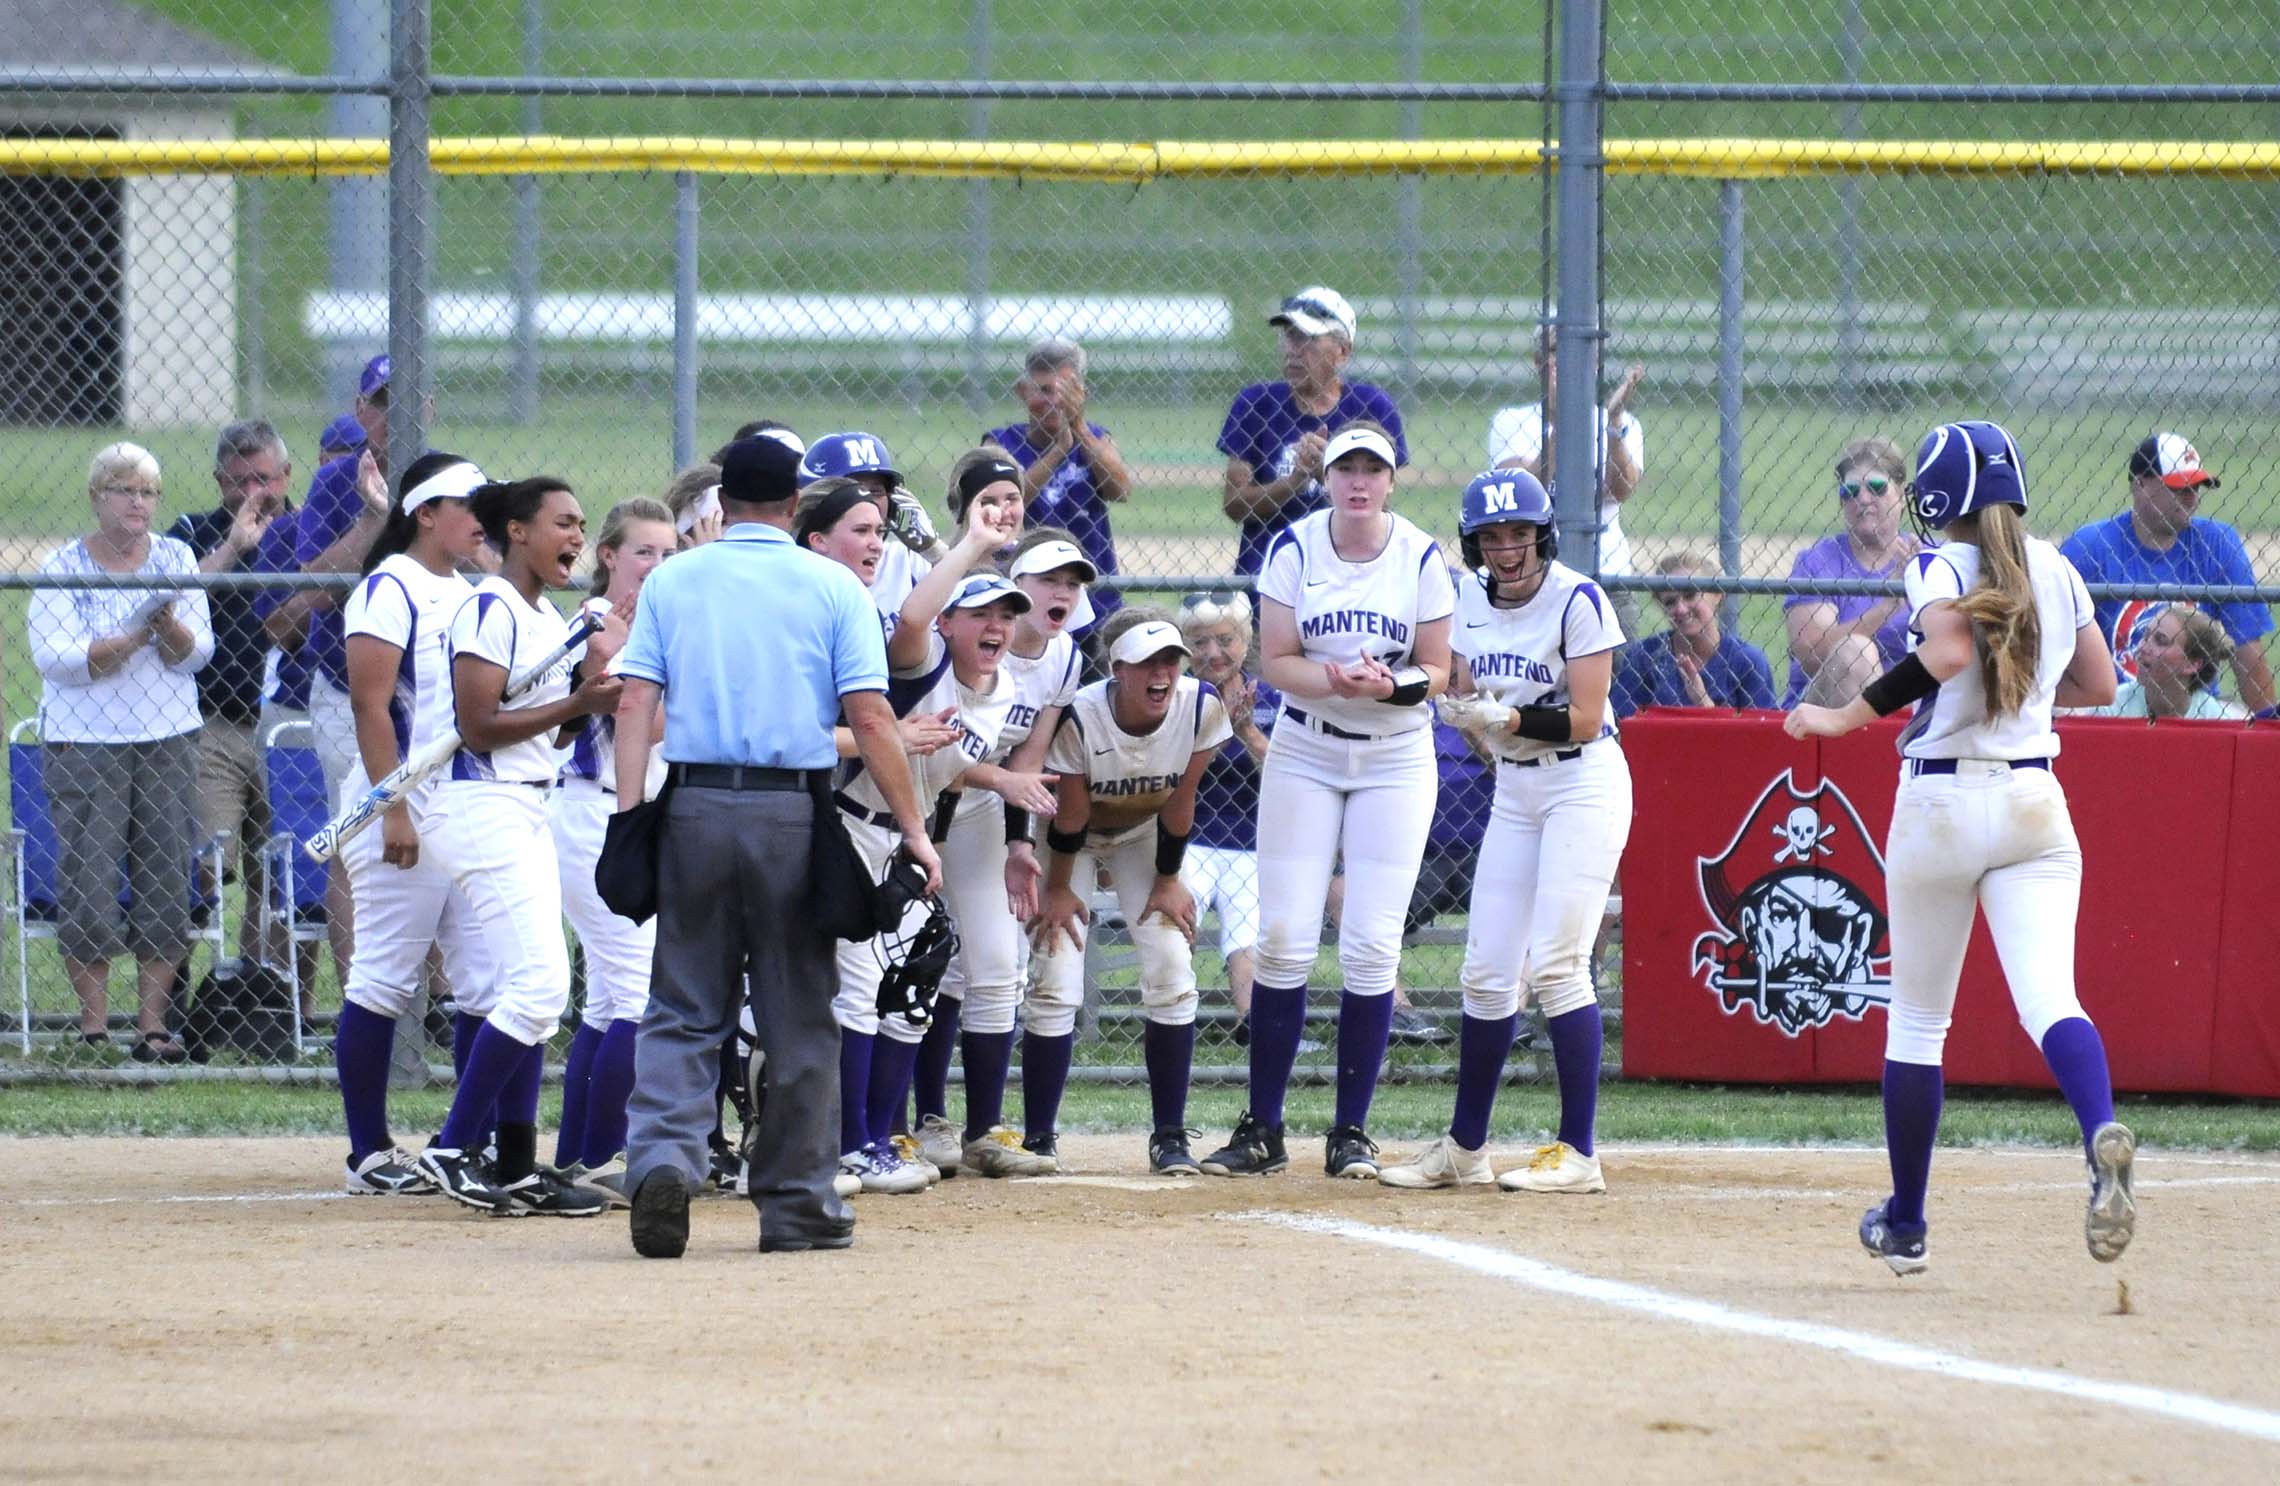  Manteno player Kori Fricke is greeted by teammates at home plate after hitting a home run Tuesday at Ottawa High School.    